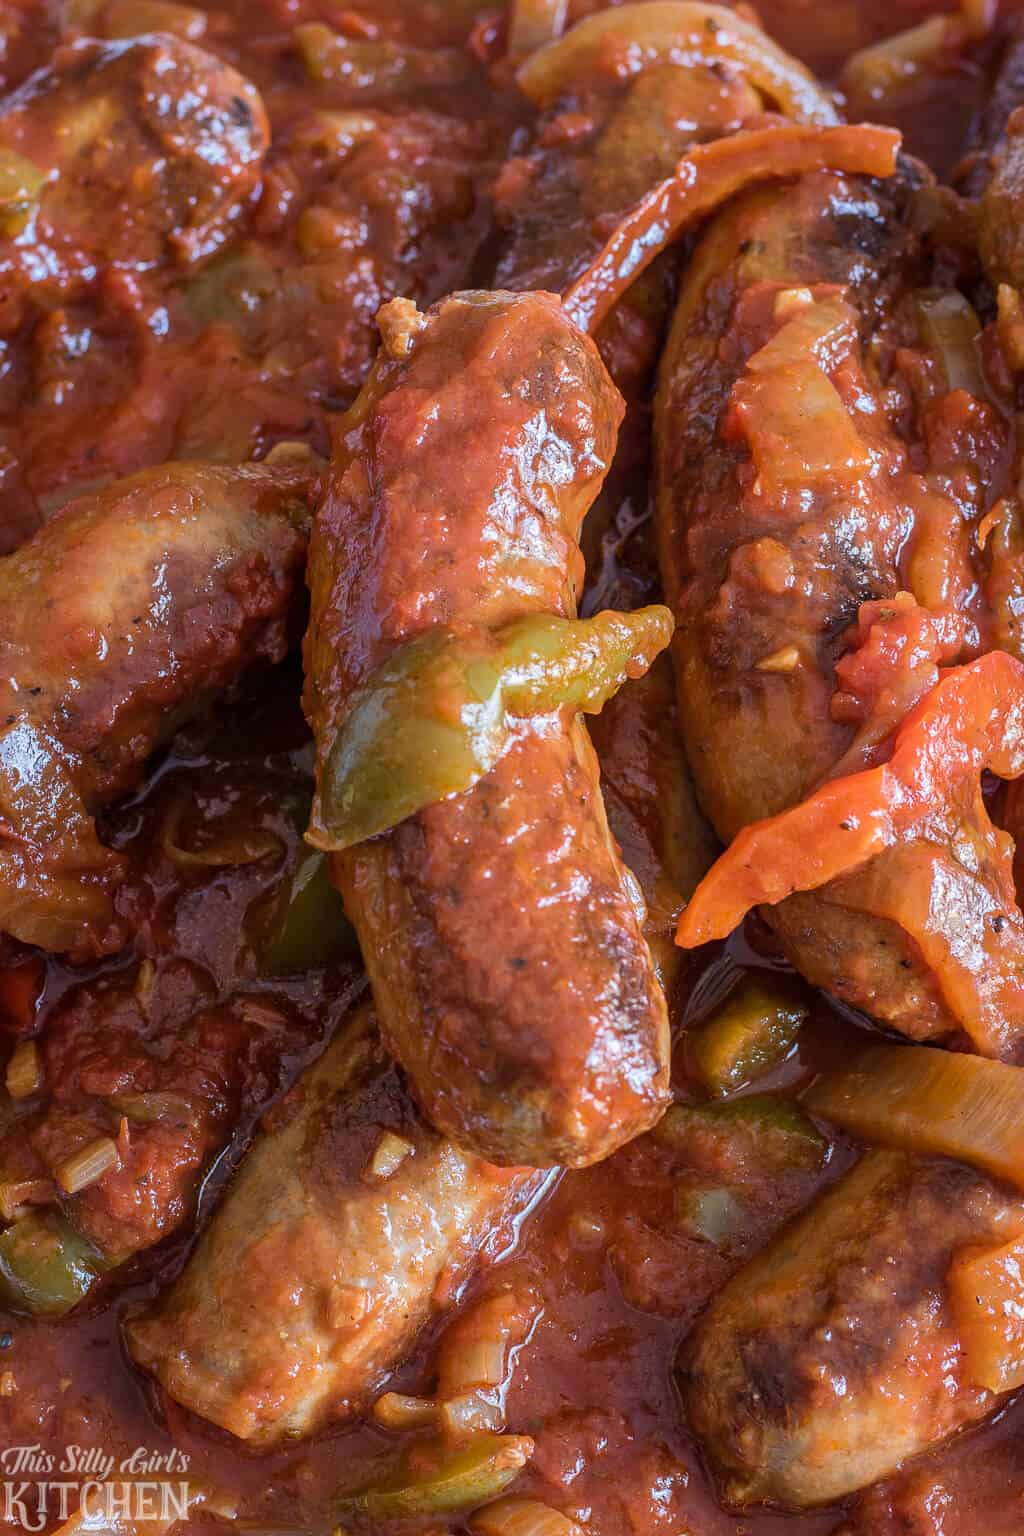 Close up of dish showing cooked sausage and peppers.